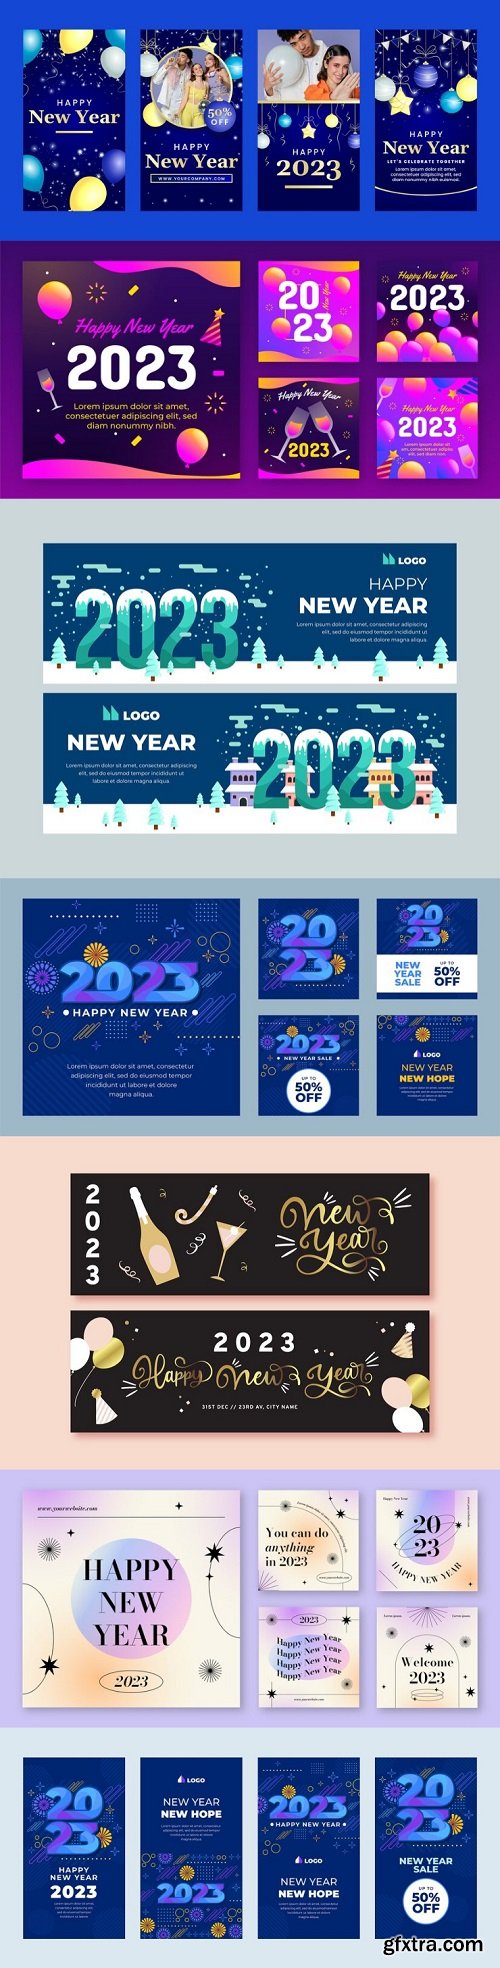 New year celebration banners